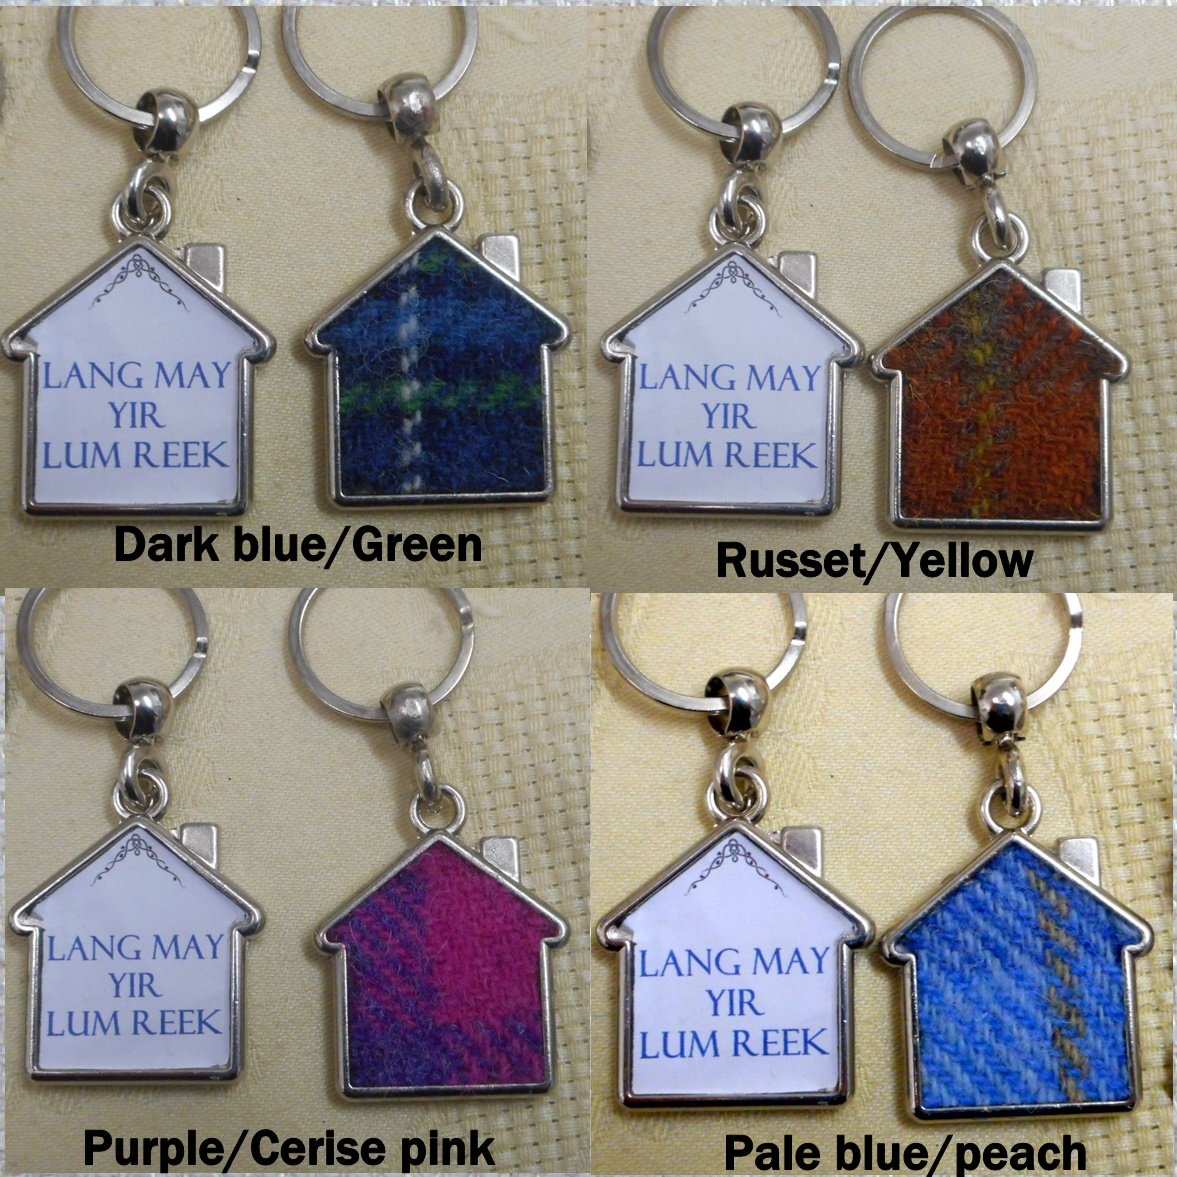 Scottish quote keyring, Harris Tweed key fob, housewarming gift or Wedding favour Lang may your lum reek, made in Scotland small gift